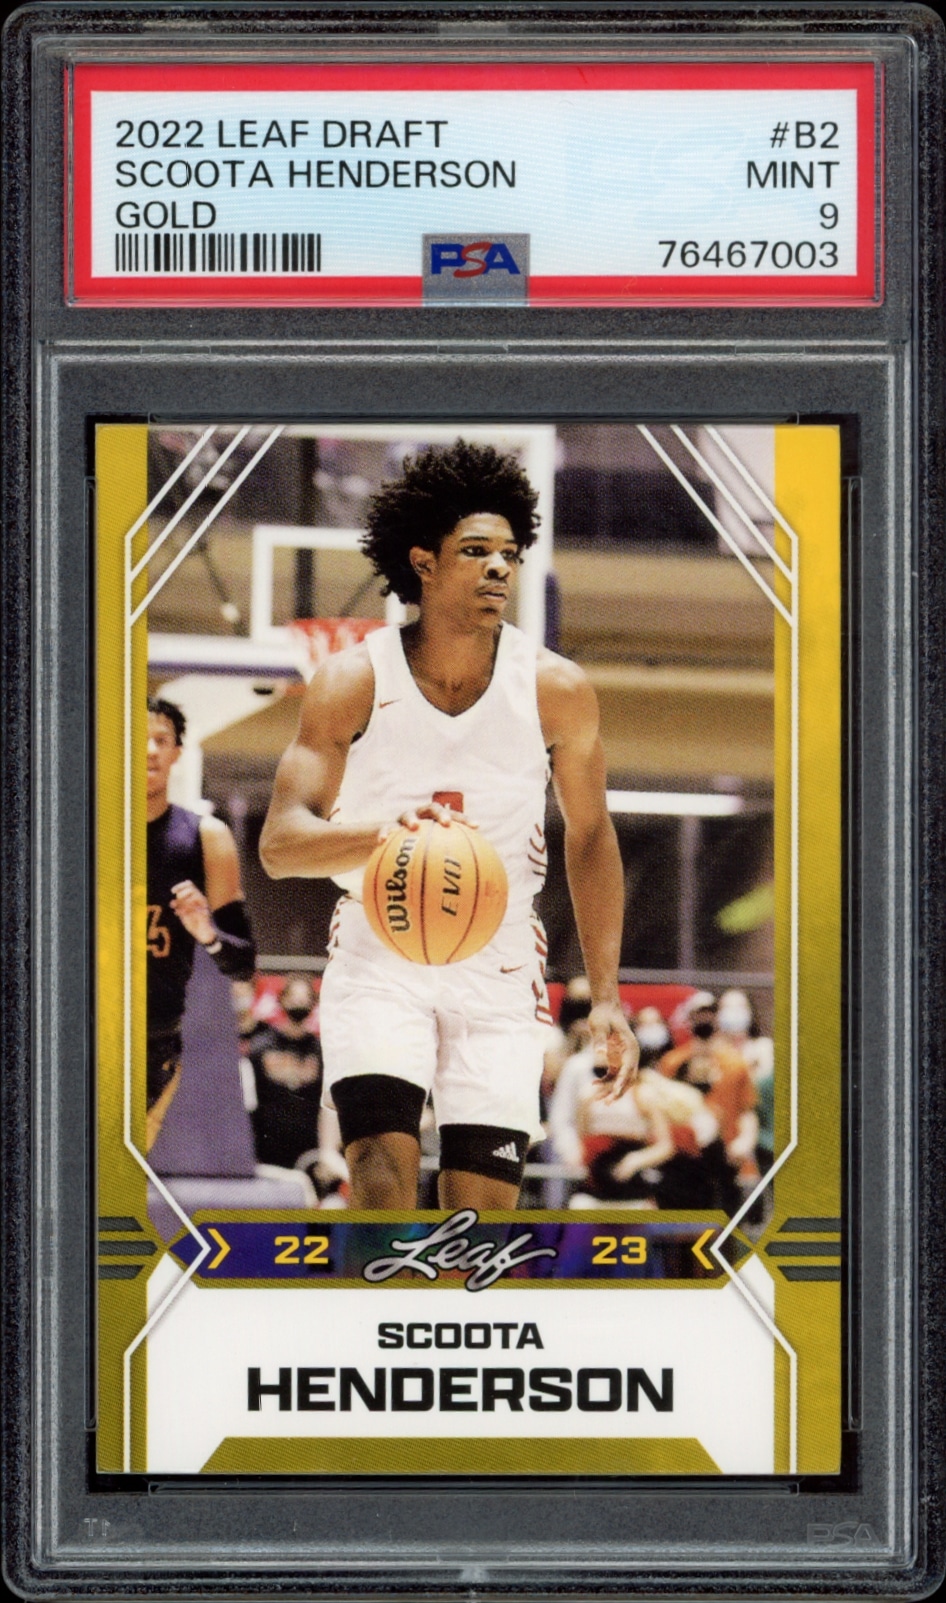 Scoota Hendersons 2022 Leaf Draft Gold basketball card, rated MINT 9 by PSA.